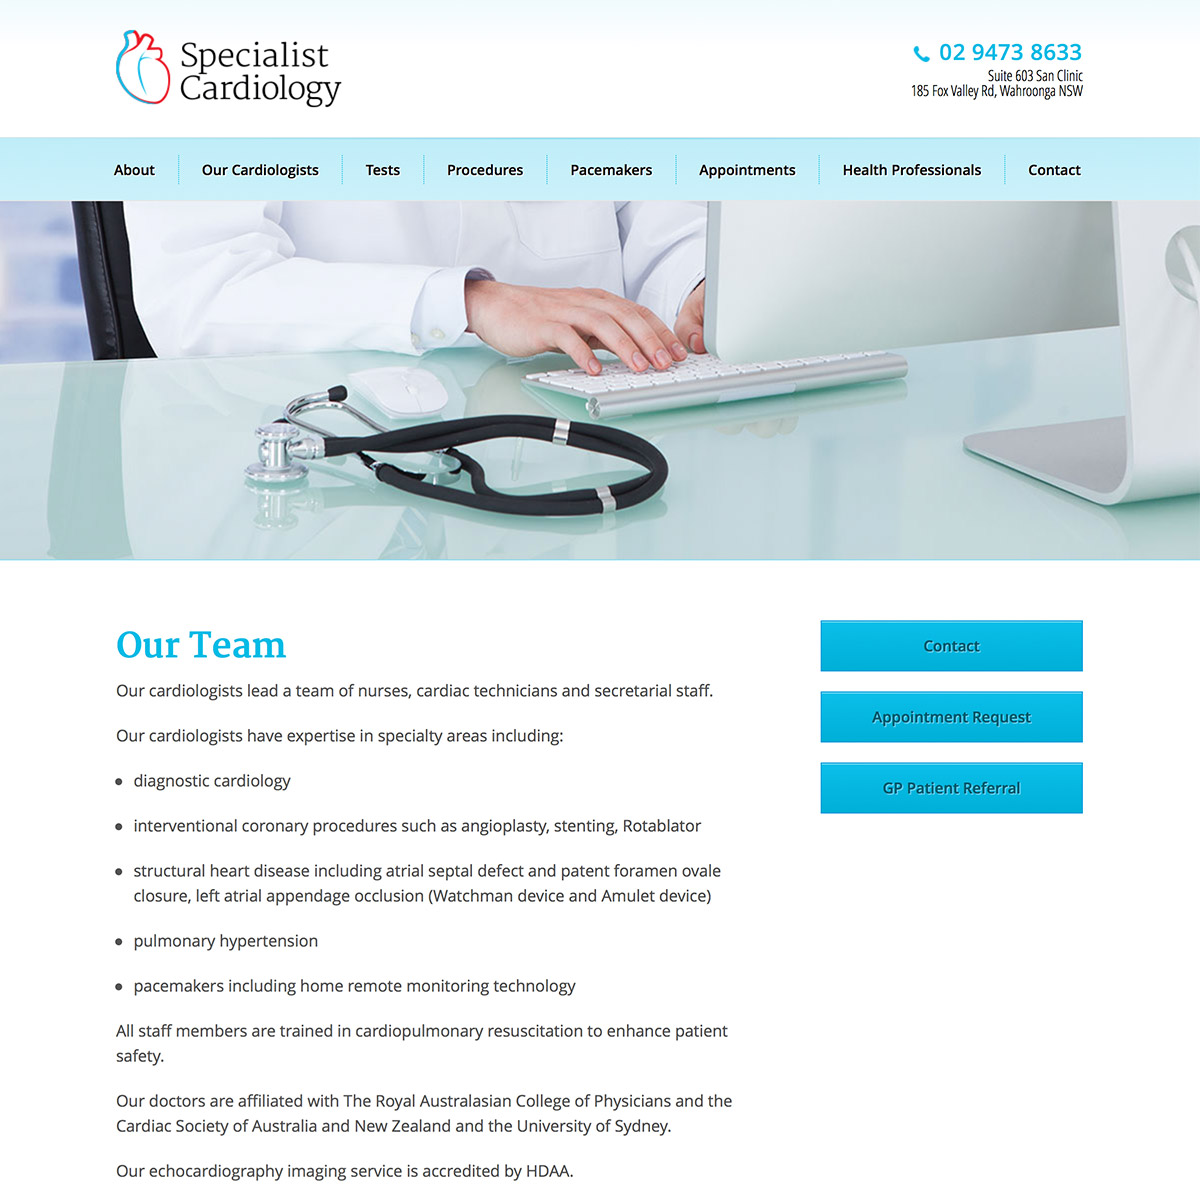 Specialist Cardiology Our Team